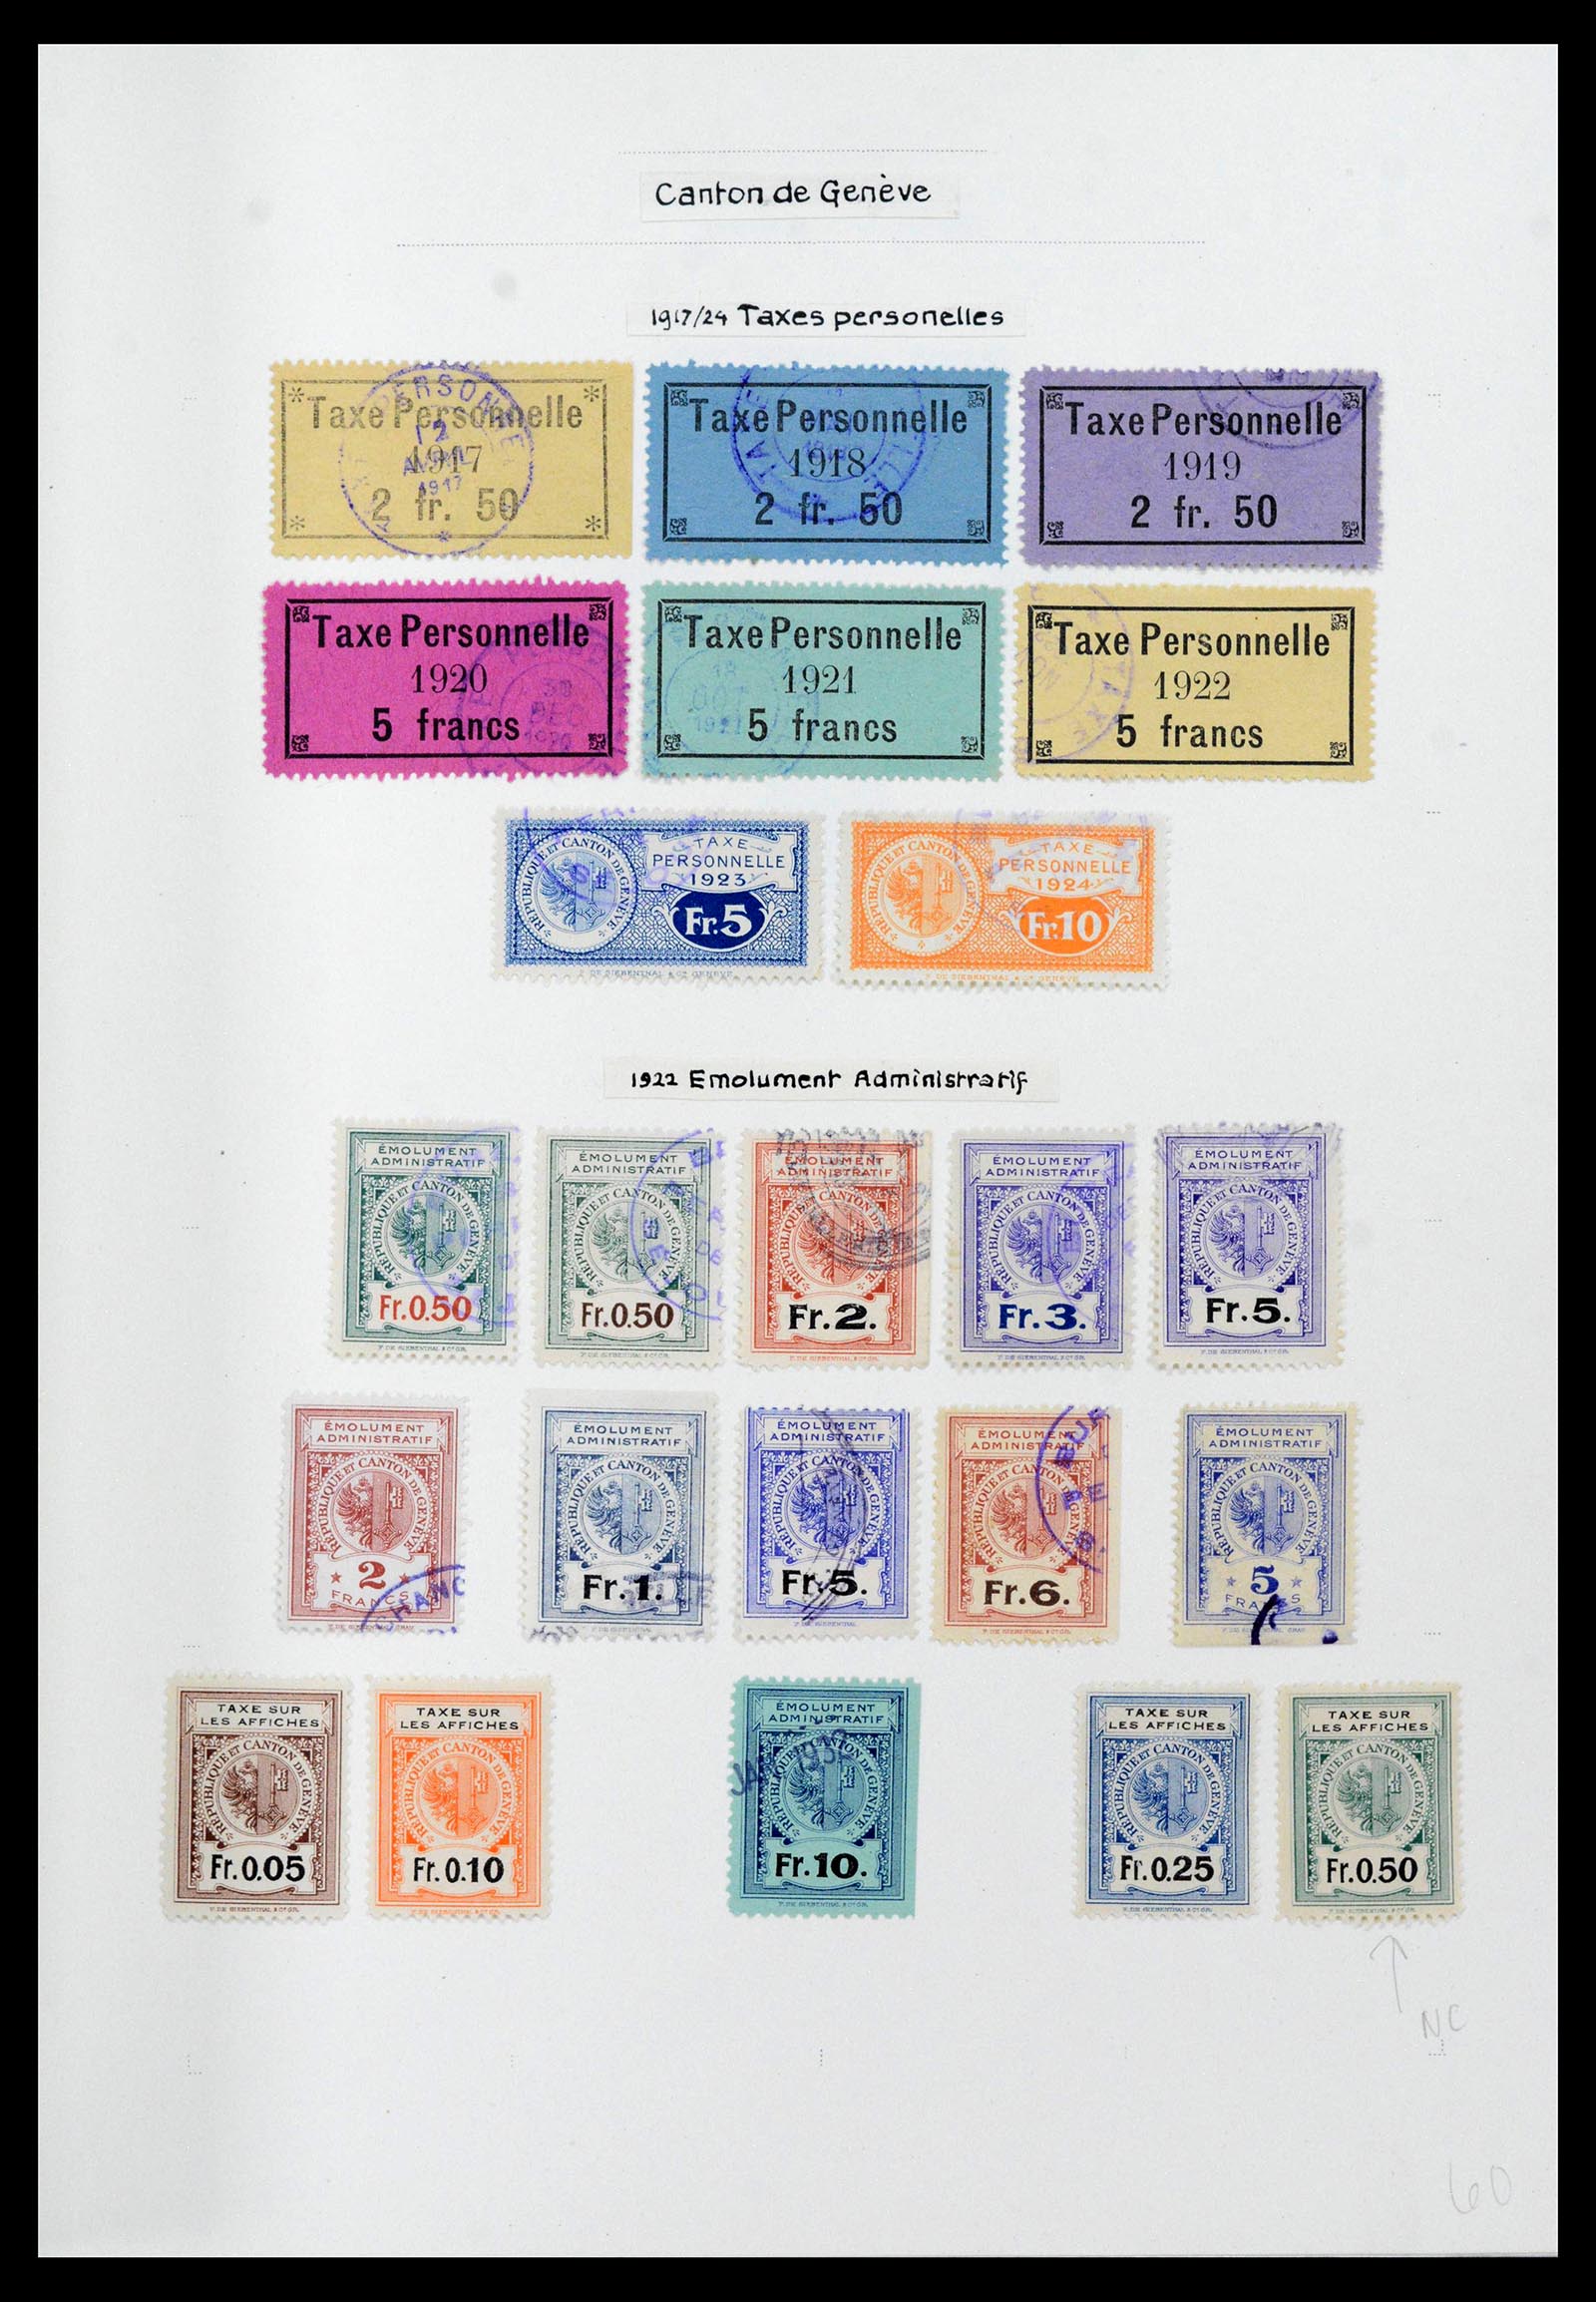 39088 0056 - Stamp collection 39088 Switzerland fiscal 1860-1948.